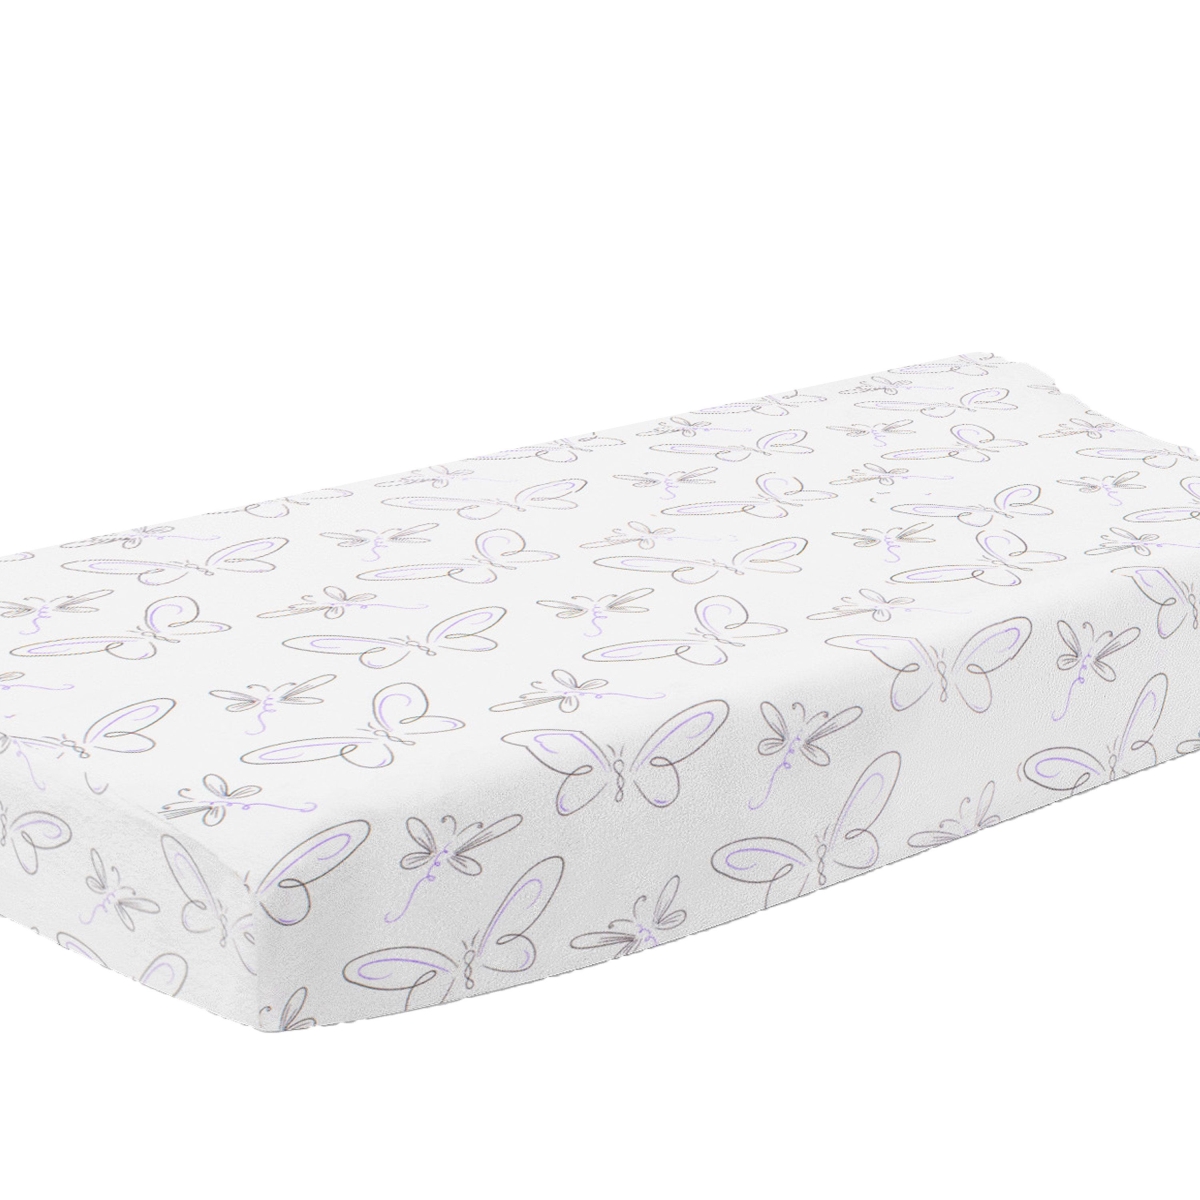 Cpc-butterflies 32 X 16 X 5 In. Butterflies & Dragonflies Changing Pad Cover Lavender Black & White